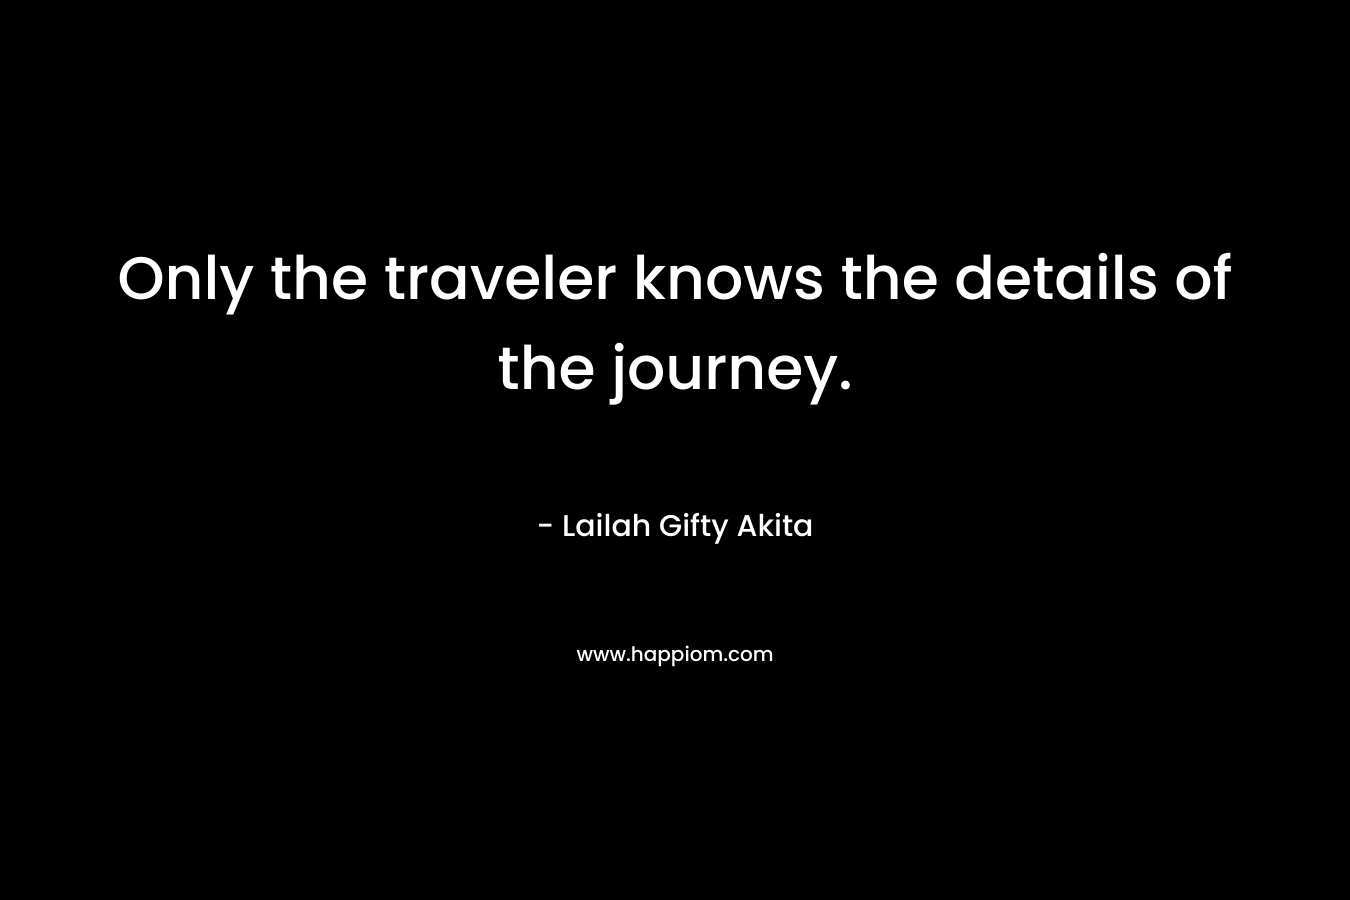 Only the traveler knows the details of the journey. – Lailah Gifty Akita